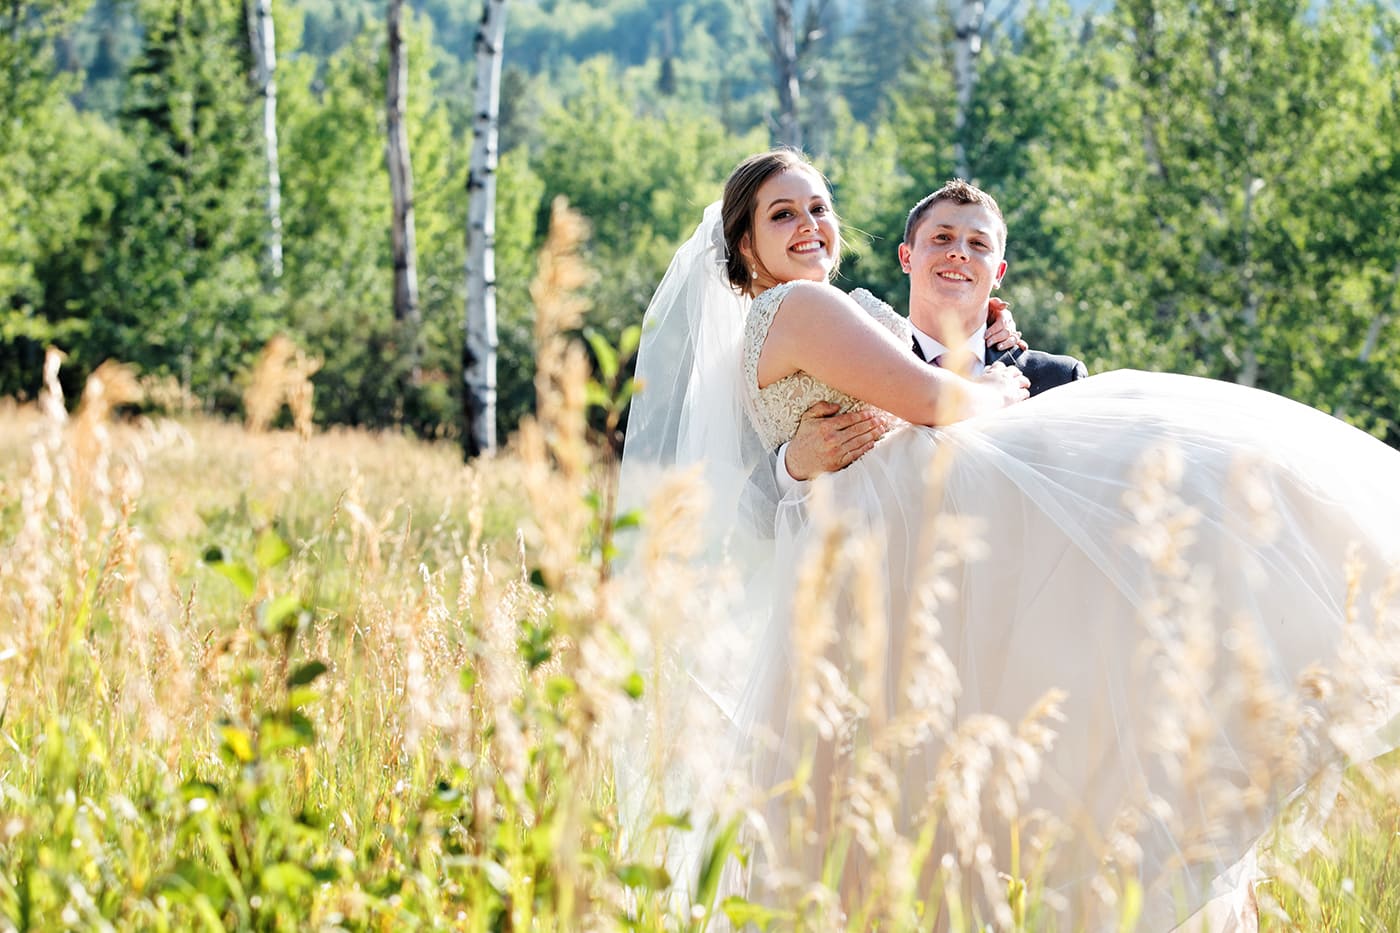 groom carrying bride through a grassy field